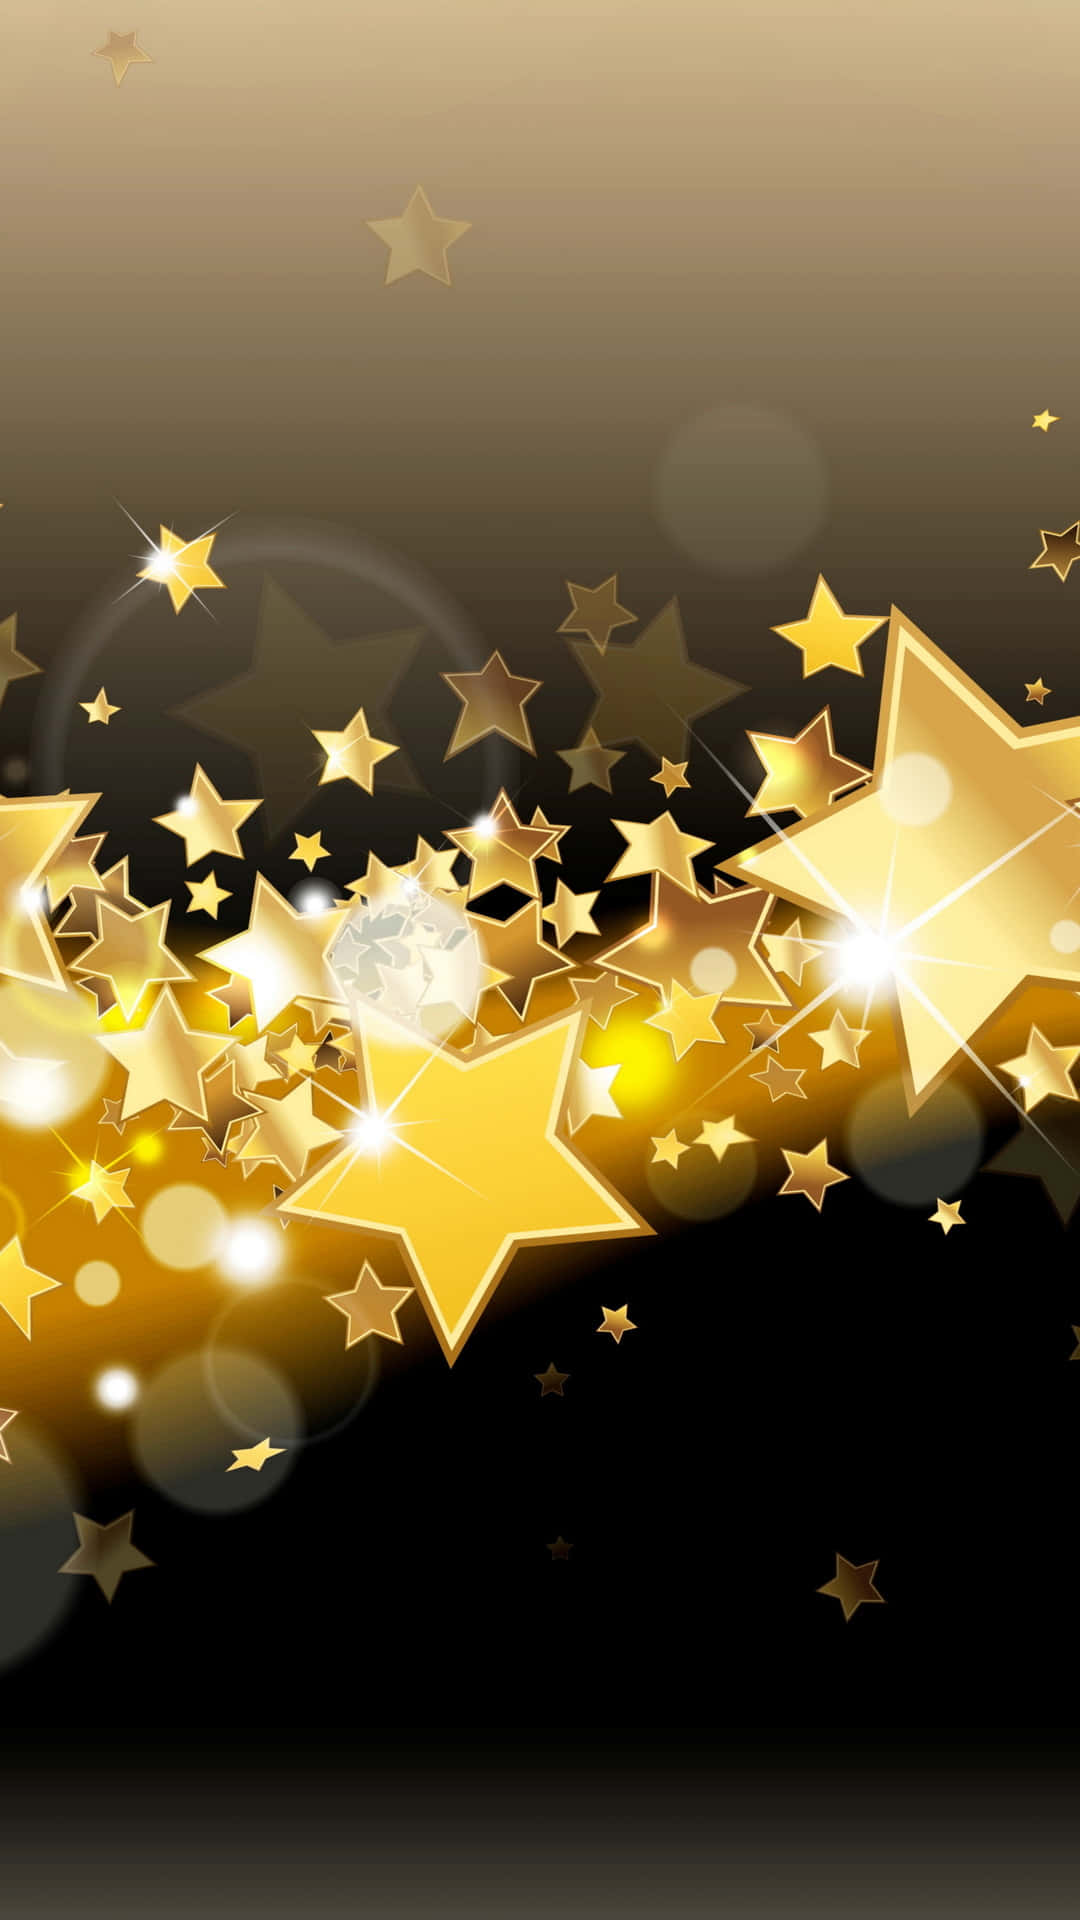 Brightening up the night with some Gold Stars Wallpaper